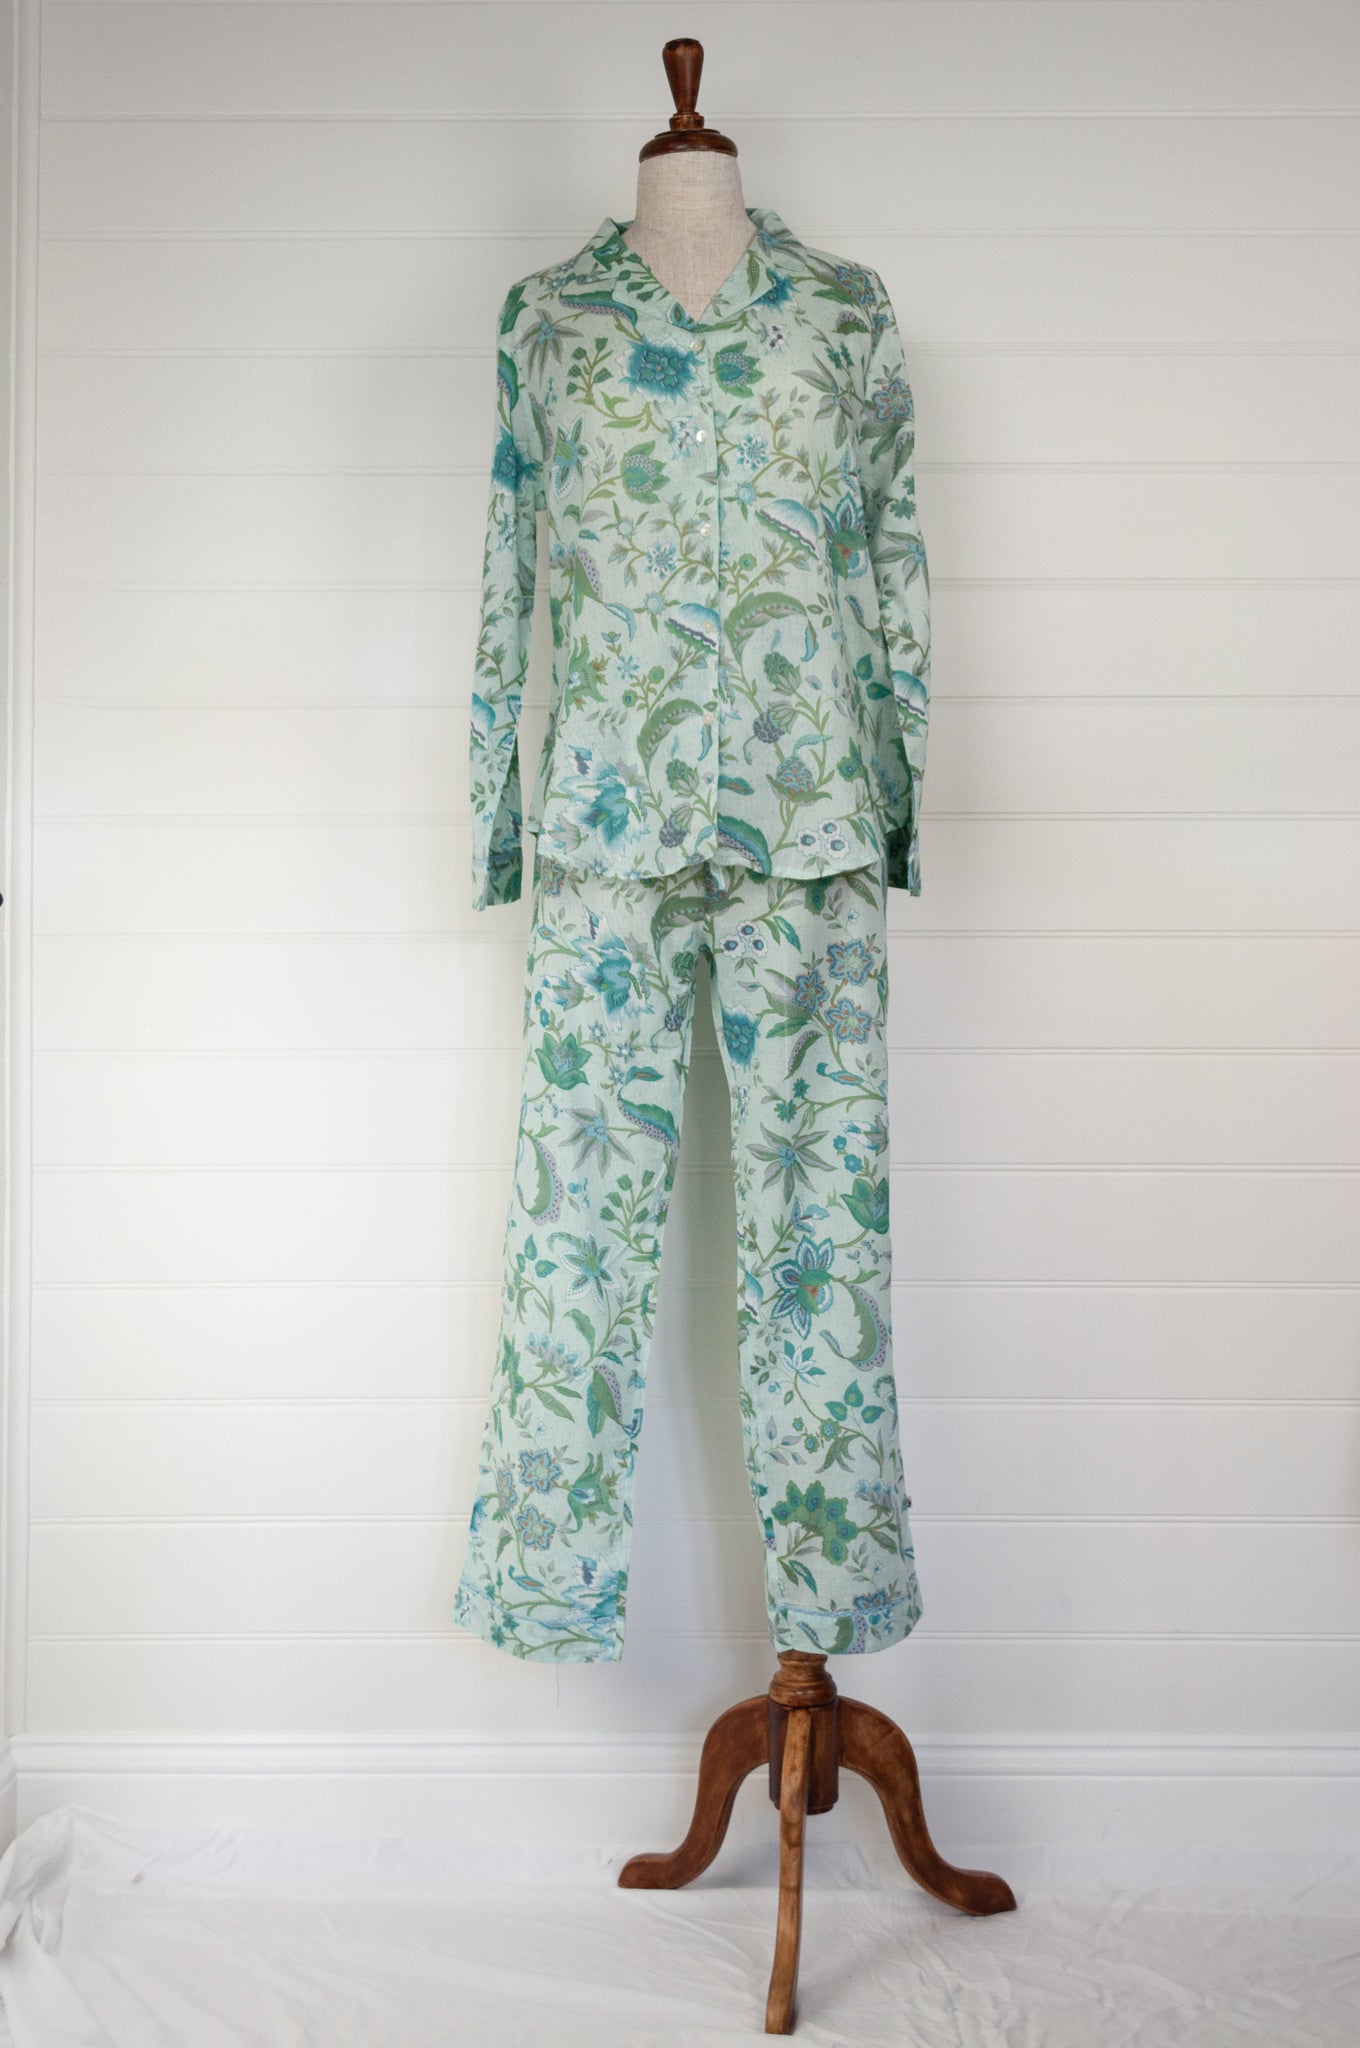 Juniper Hearth cotton voile pyjamas,This Juniper Hearth kimono is screen printed with large aqua, teal and green flowers on a stippled pale blue background.